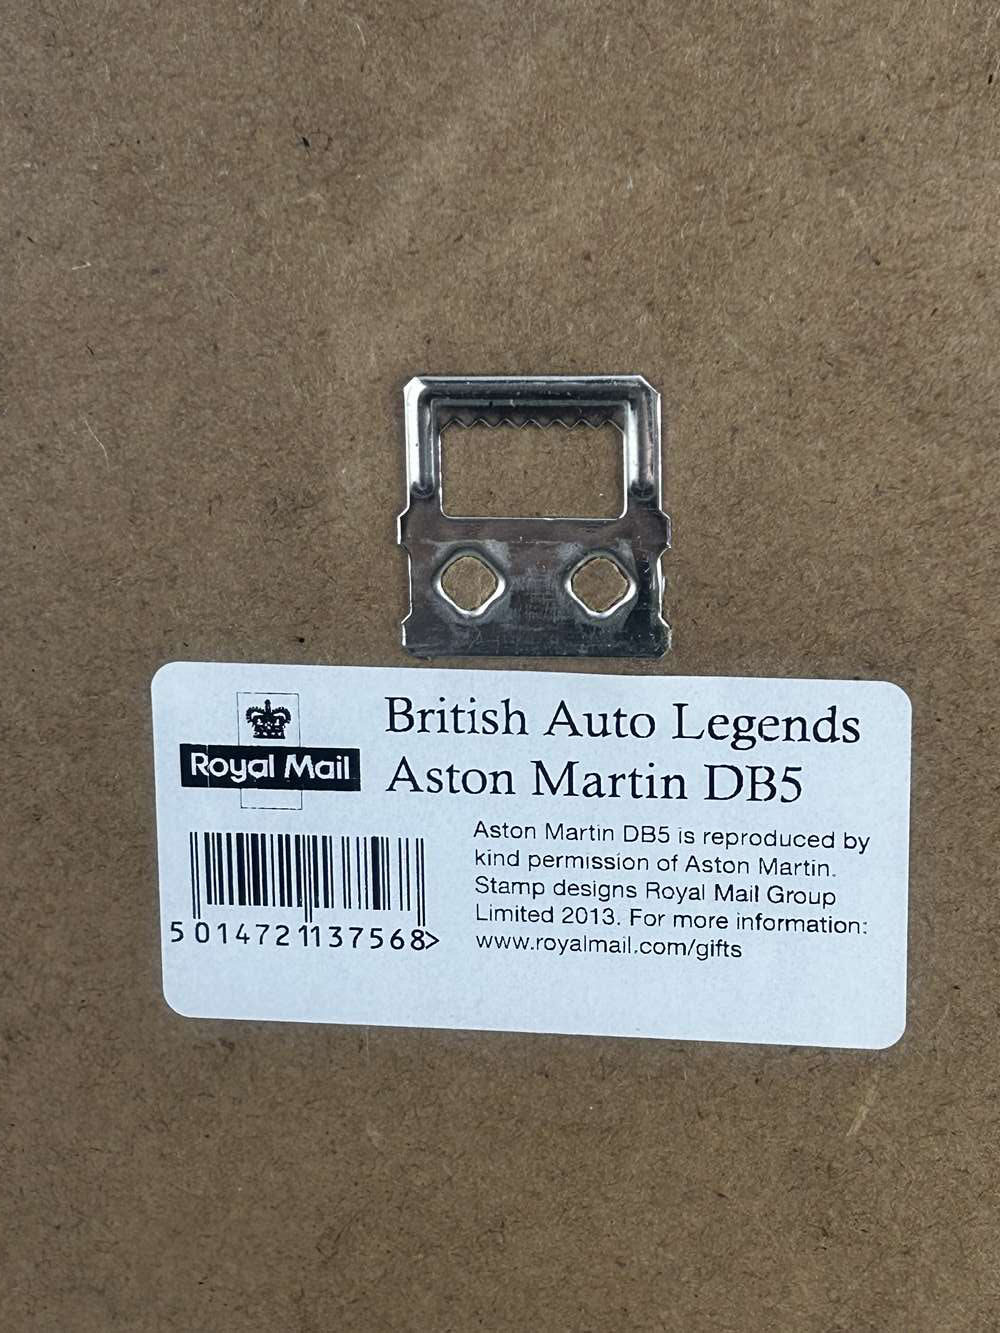 British Auto Legends -Aston Martin DB5 Framed Picture &#038; 1st Class Stamp Montage. - Image 4 of 6